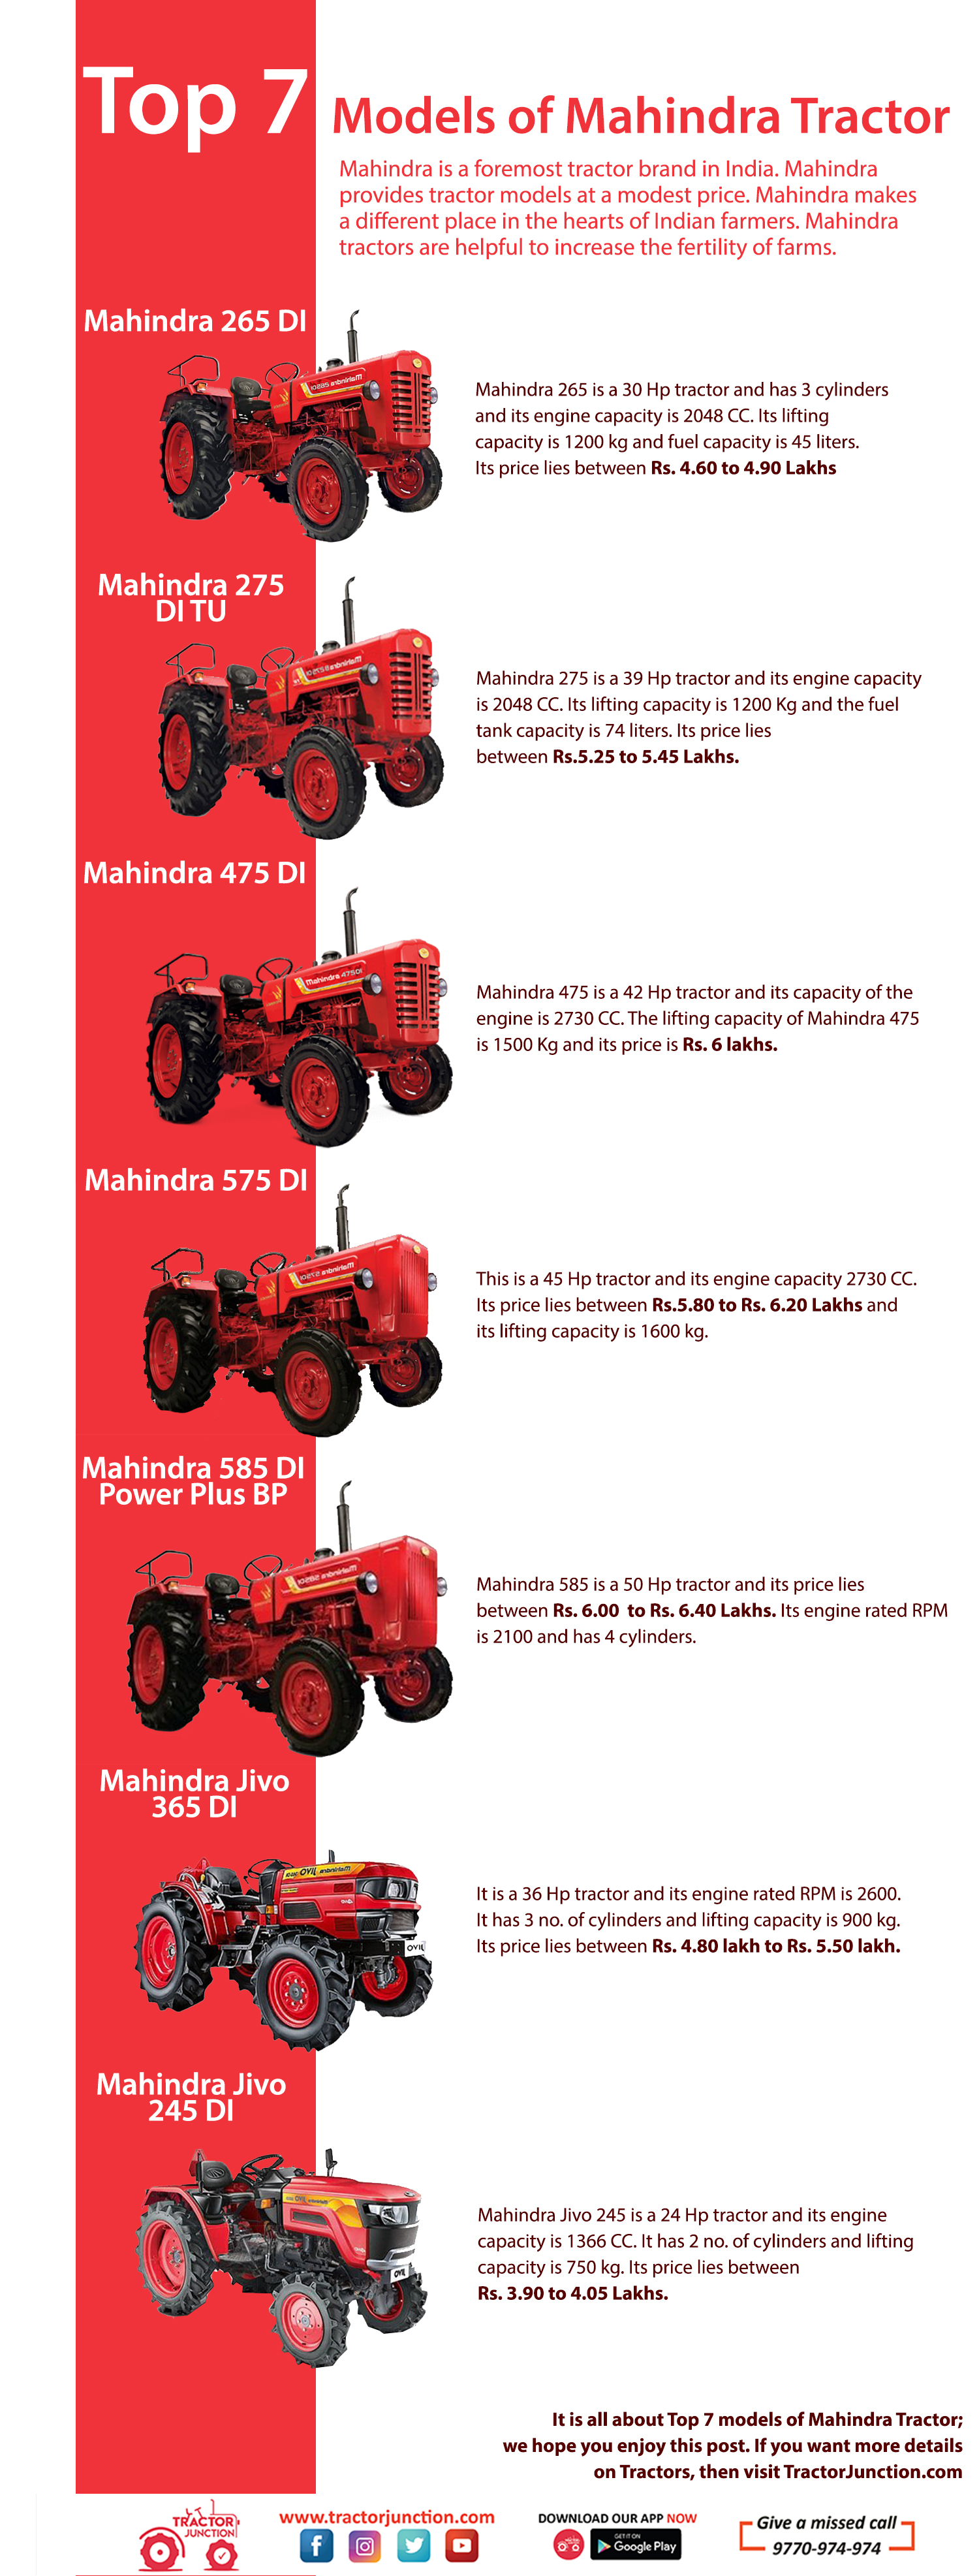 Top 7 models of Mahindra Tractor - Infographic 